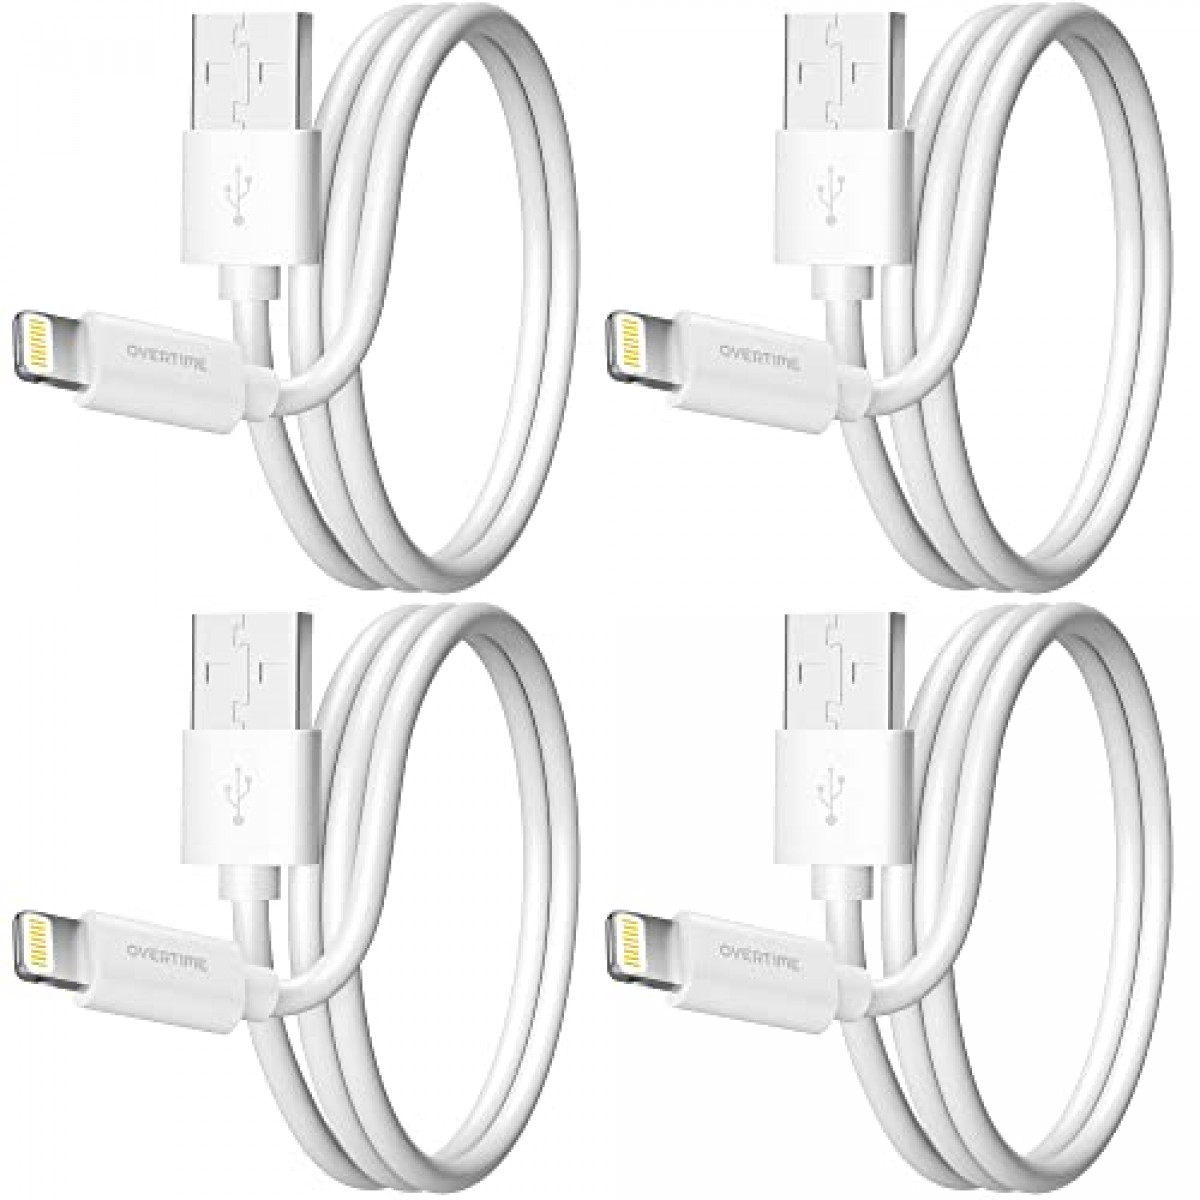 iPhone Charger Cable 4 Foot (4-Pack), Overtime Apple